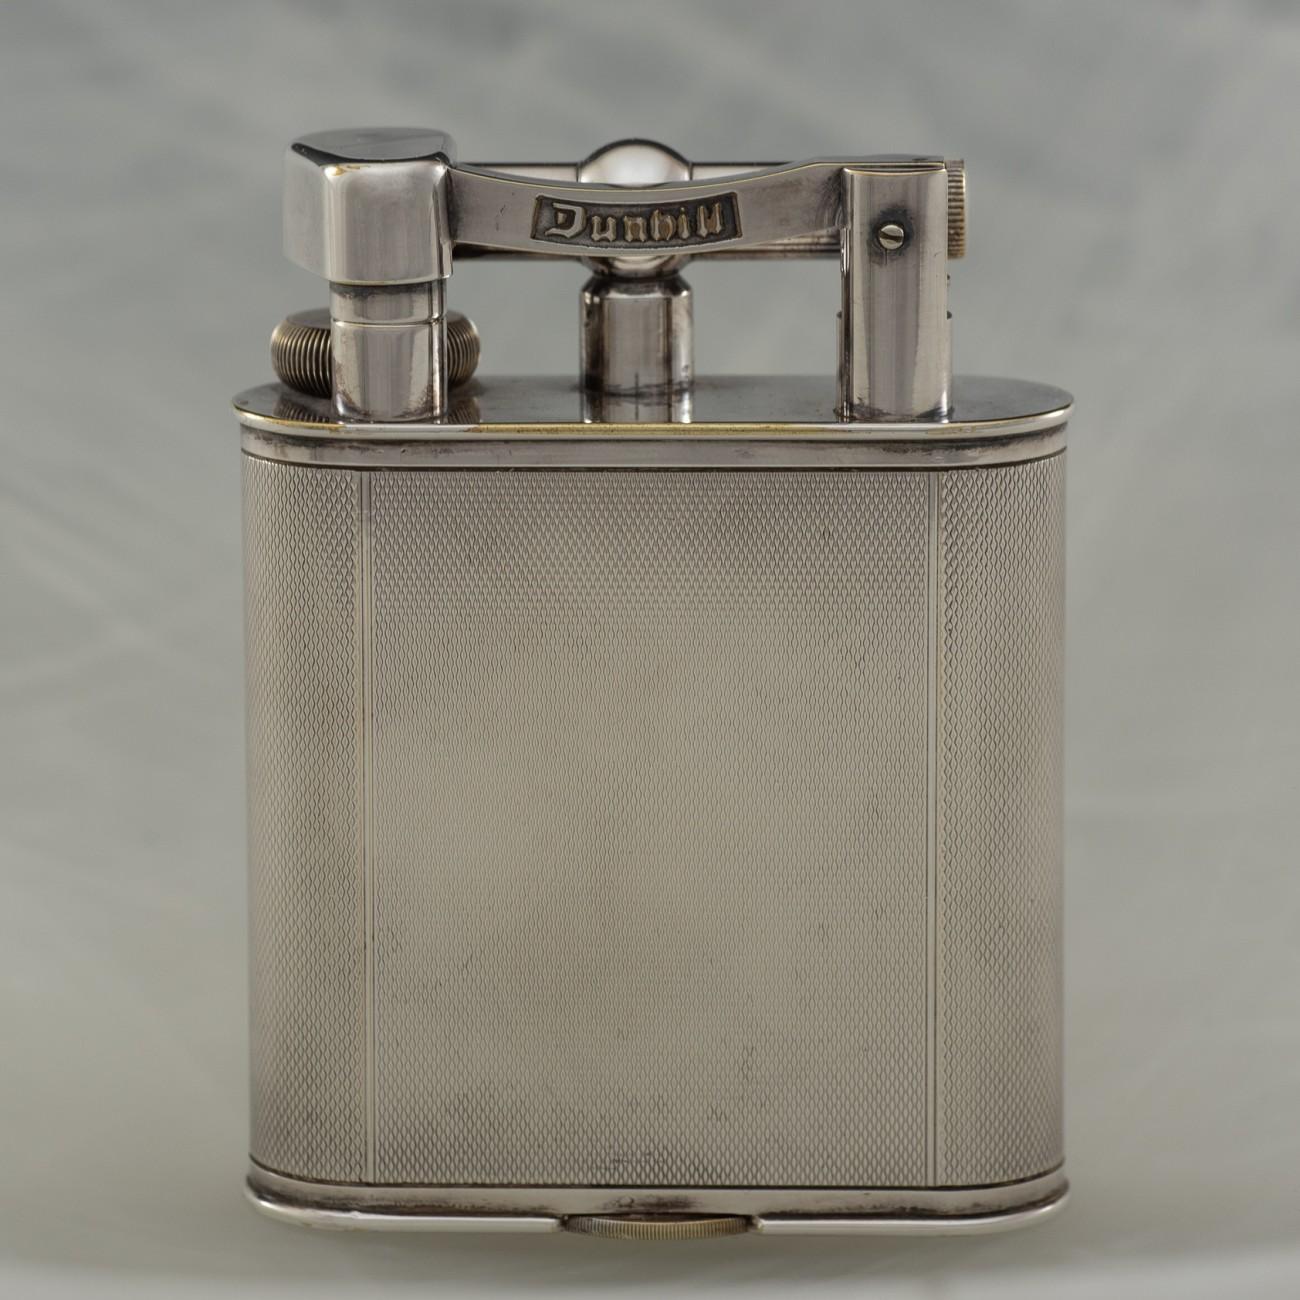 An engine turned silver plated Dunhill 'Giant' lighter; circa 1948. The 'Giant' table lighter was first seen in the Dunhill catalogue in 1929 and was an immediate success.

Dimensions: 10.5 cm/4 inches (height) x 8 cm/3? inches (width) x 2.5 cm/1